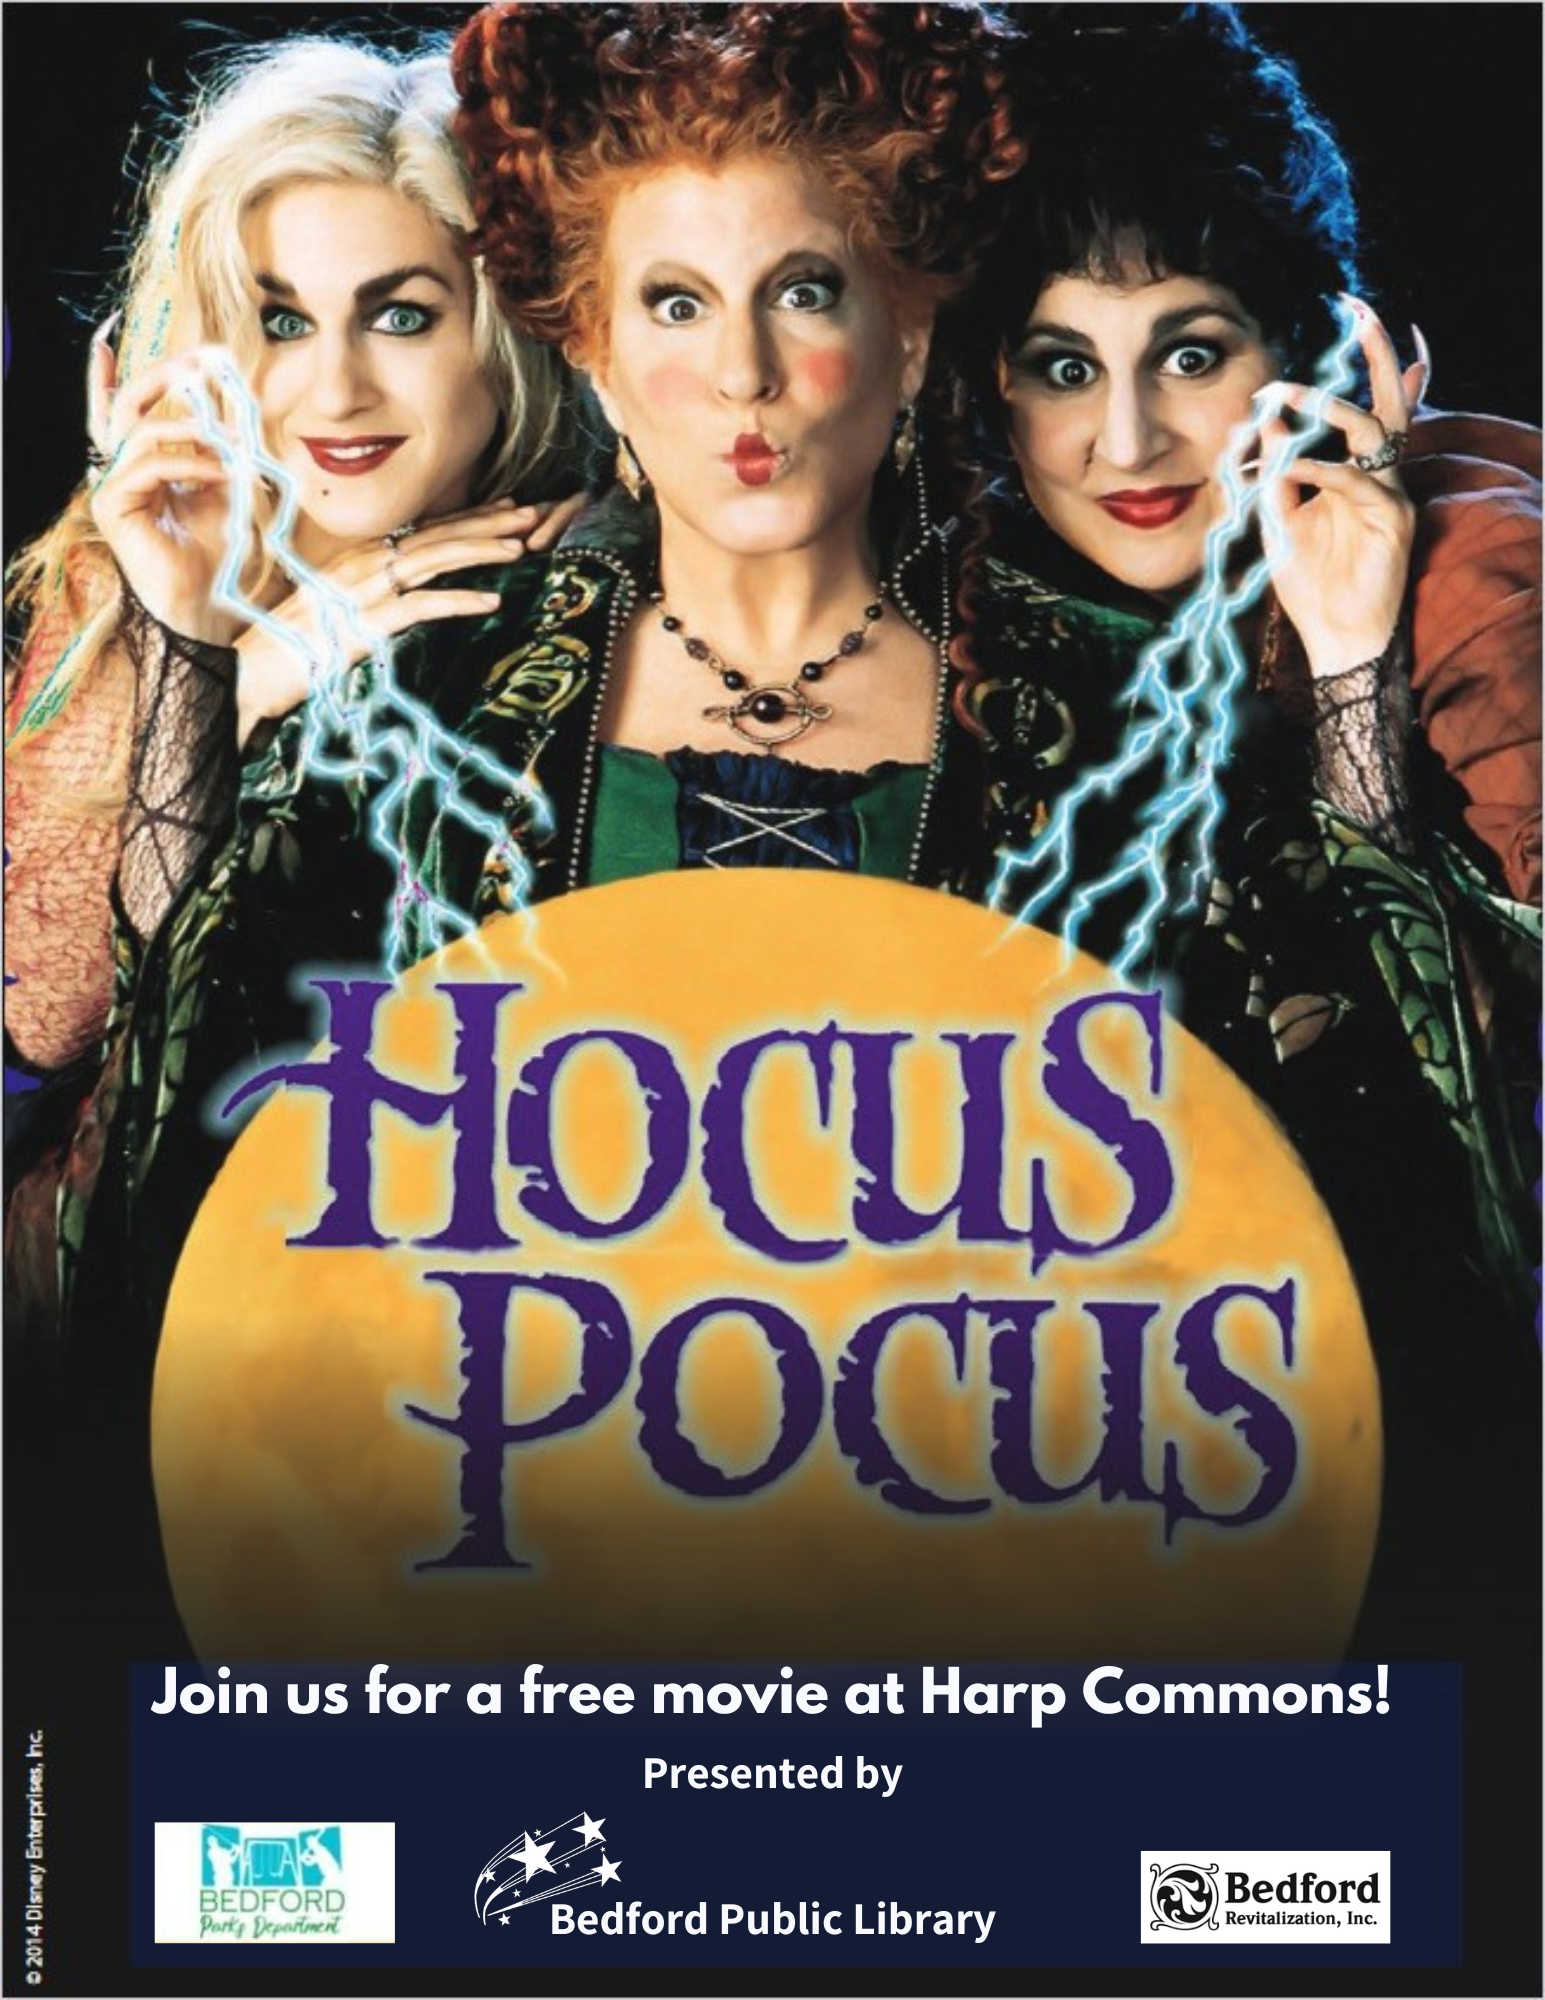 Hocus Pocus. Join us for a free movie at Harp Commons. Presented by Bedford Parks Department, Bedford Public Library, Bedford Revitalization, Inc. Movie poster featuring Sarah Jessica Parker, Bette Middler, and Kathy Najimy as characters from the movie. Hocus Pocus in purple letters over a large orange moon.